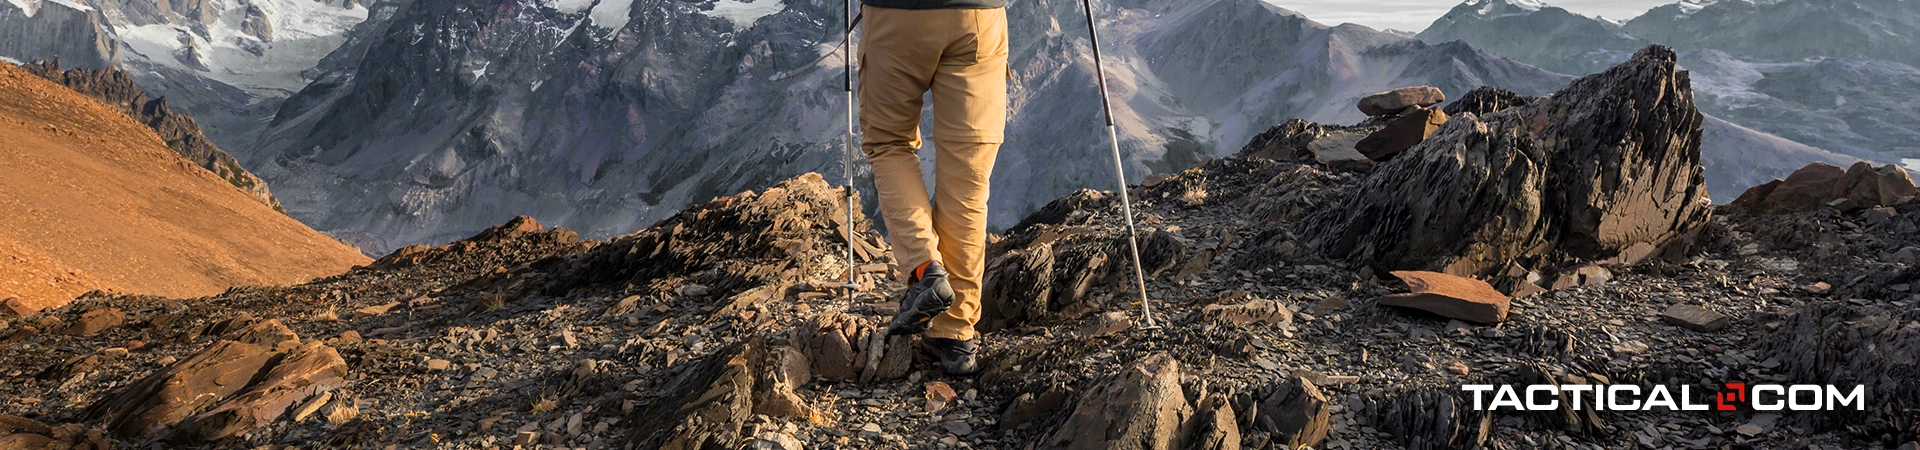 person hiking with help from trekking poles